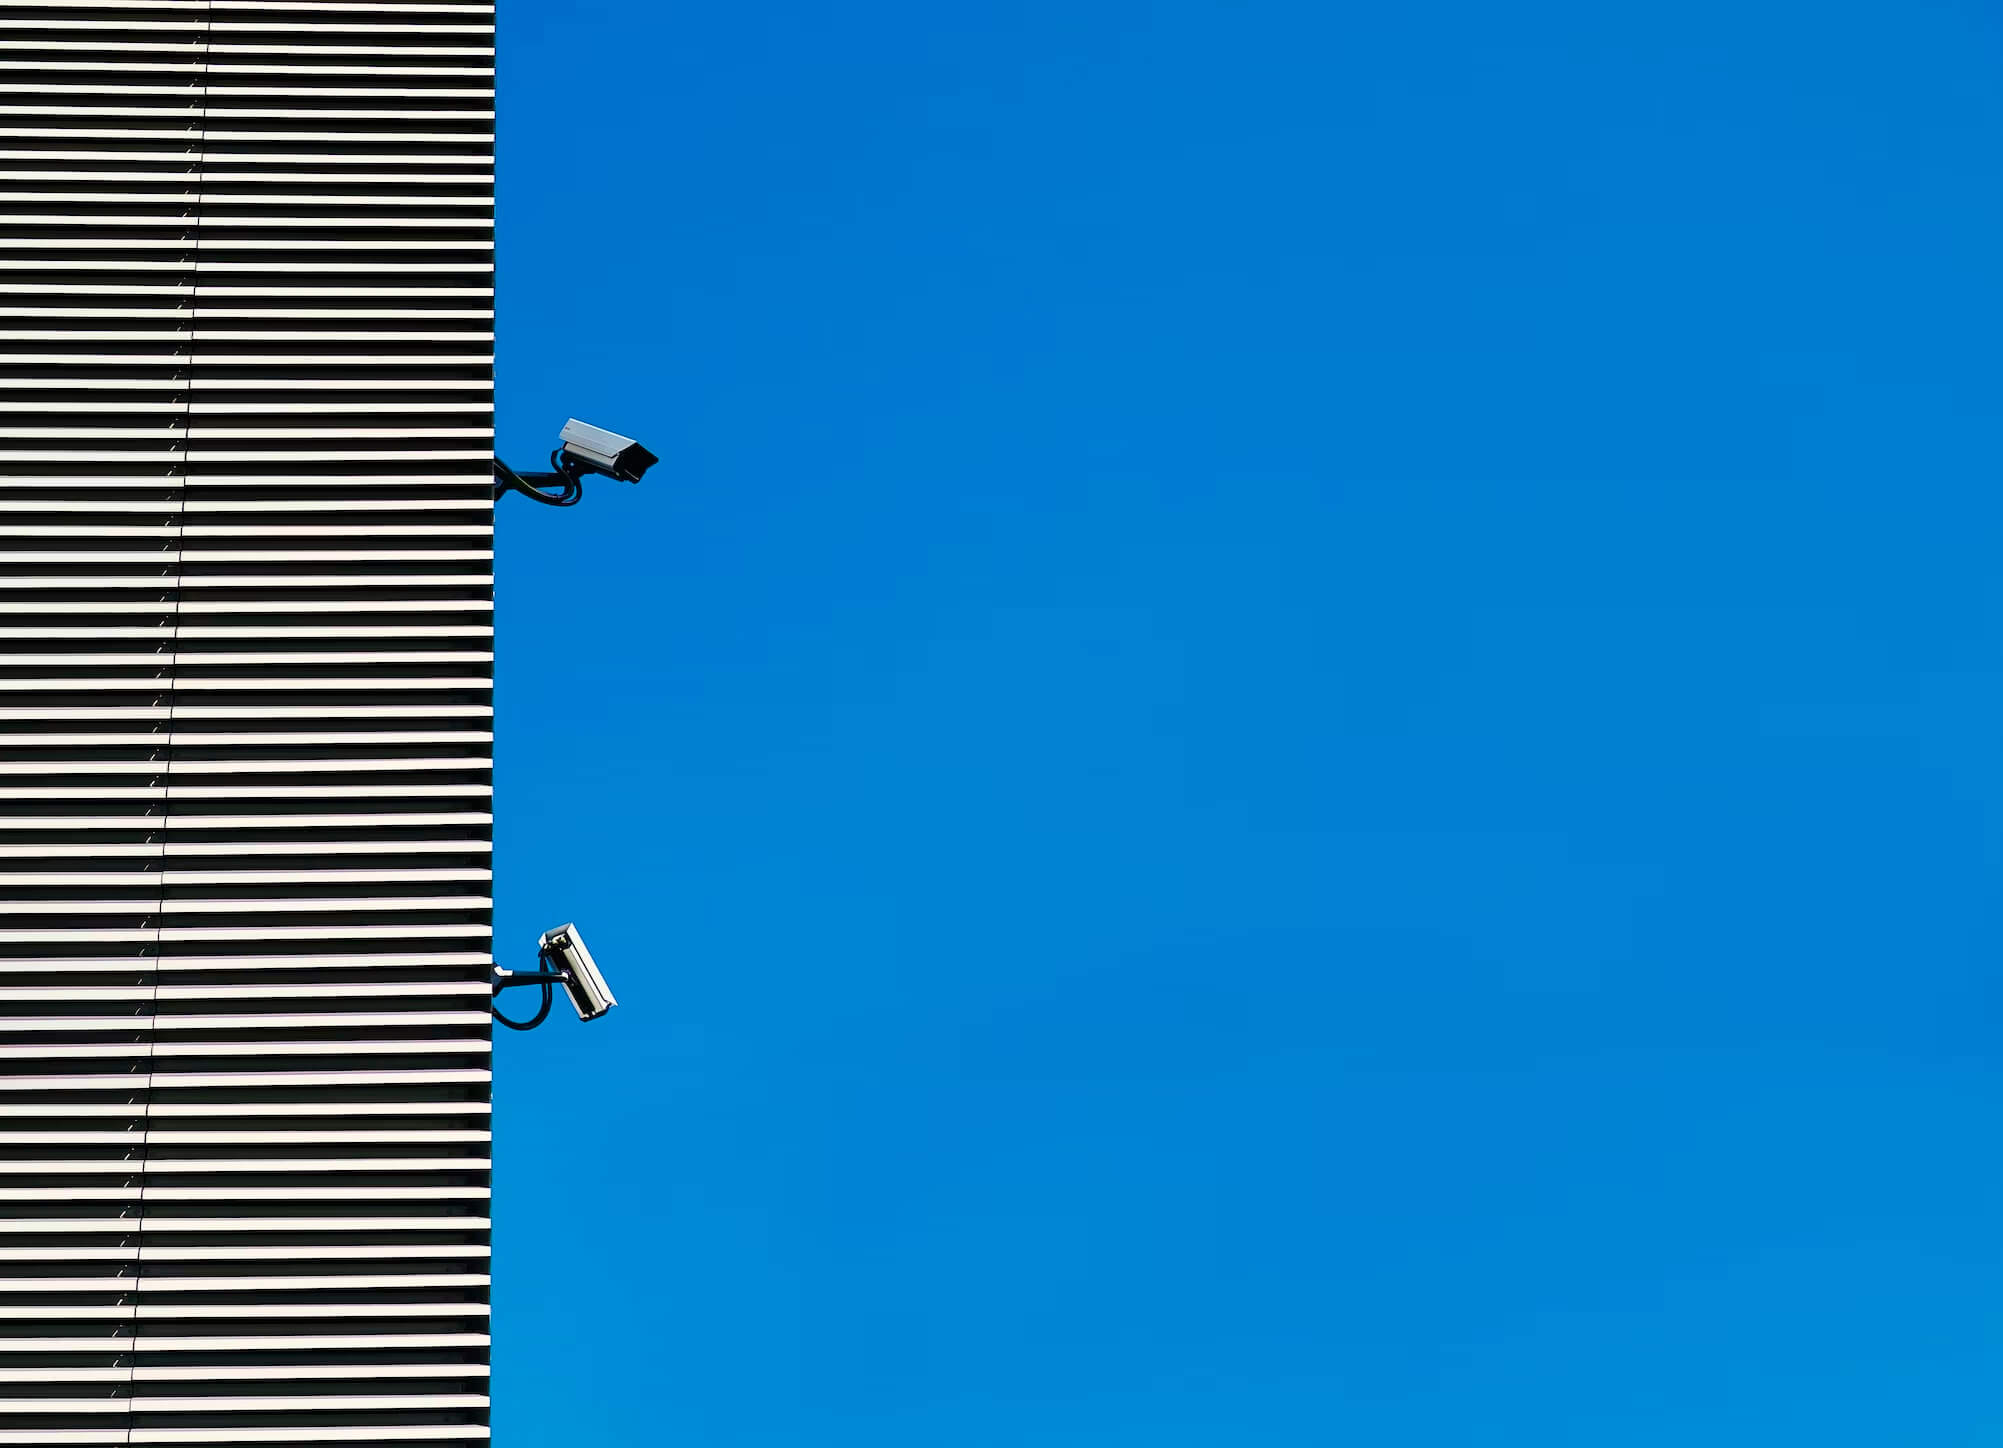 Security cameras against a blue background.